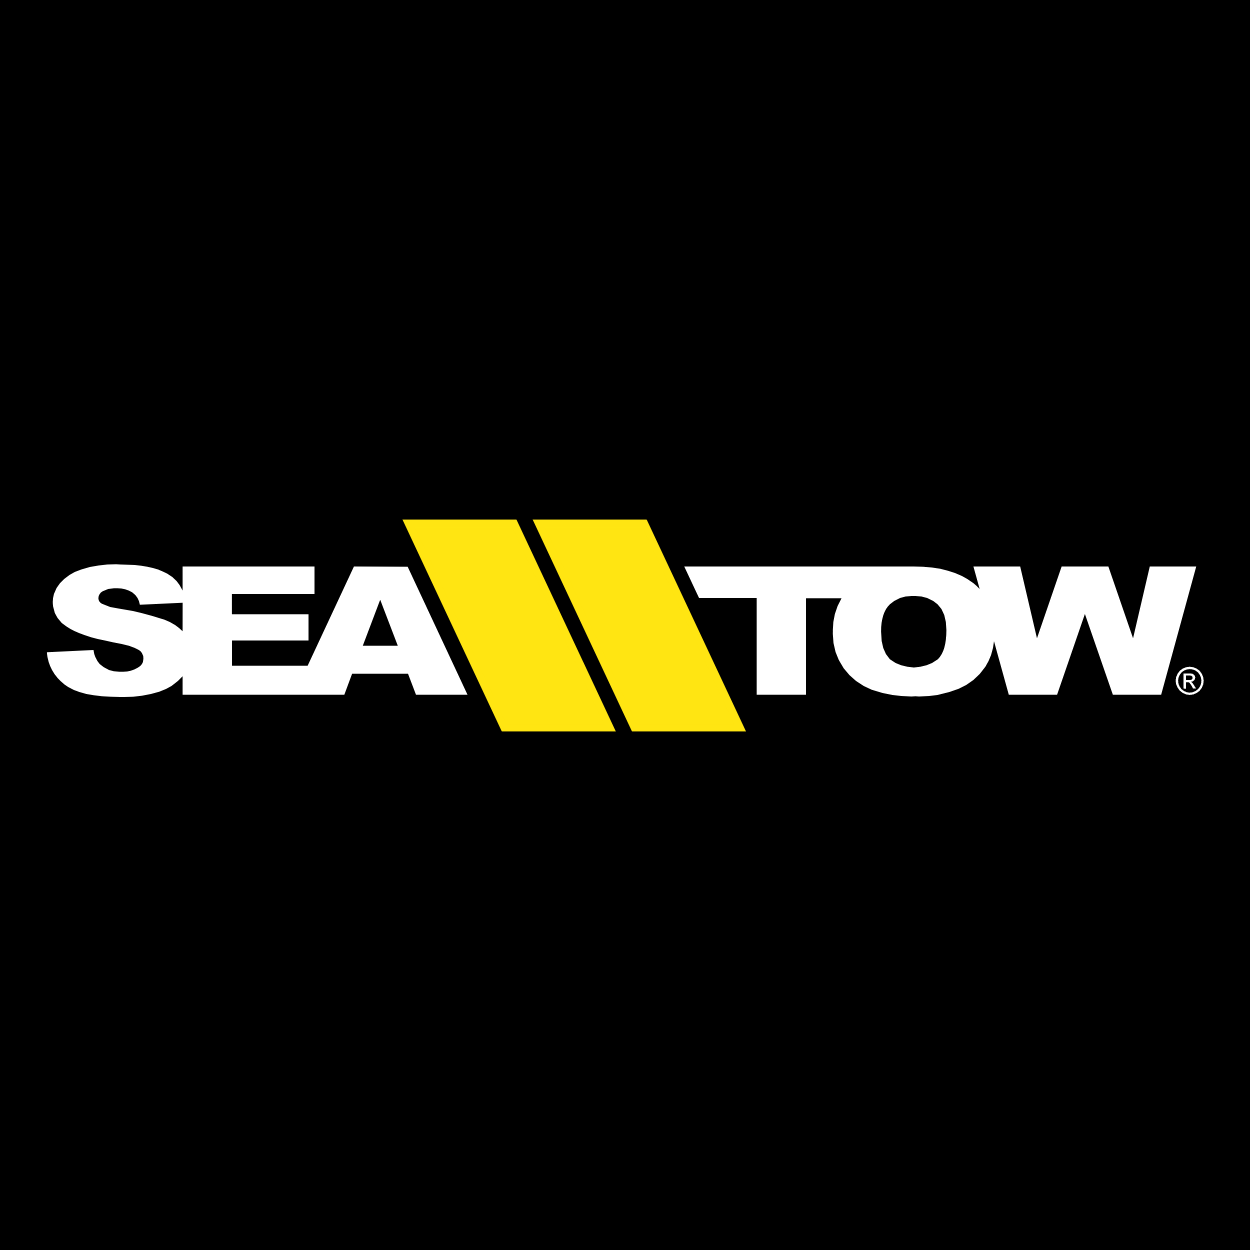 Sea Tow Review: Analyzing the Boat Towing Service Efficiency